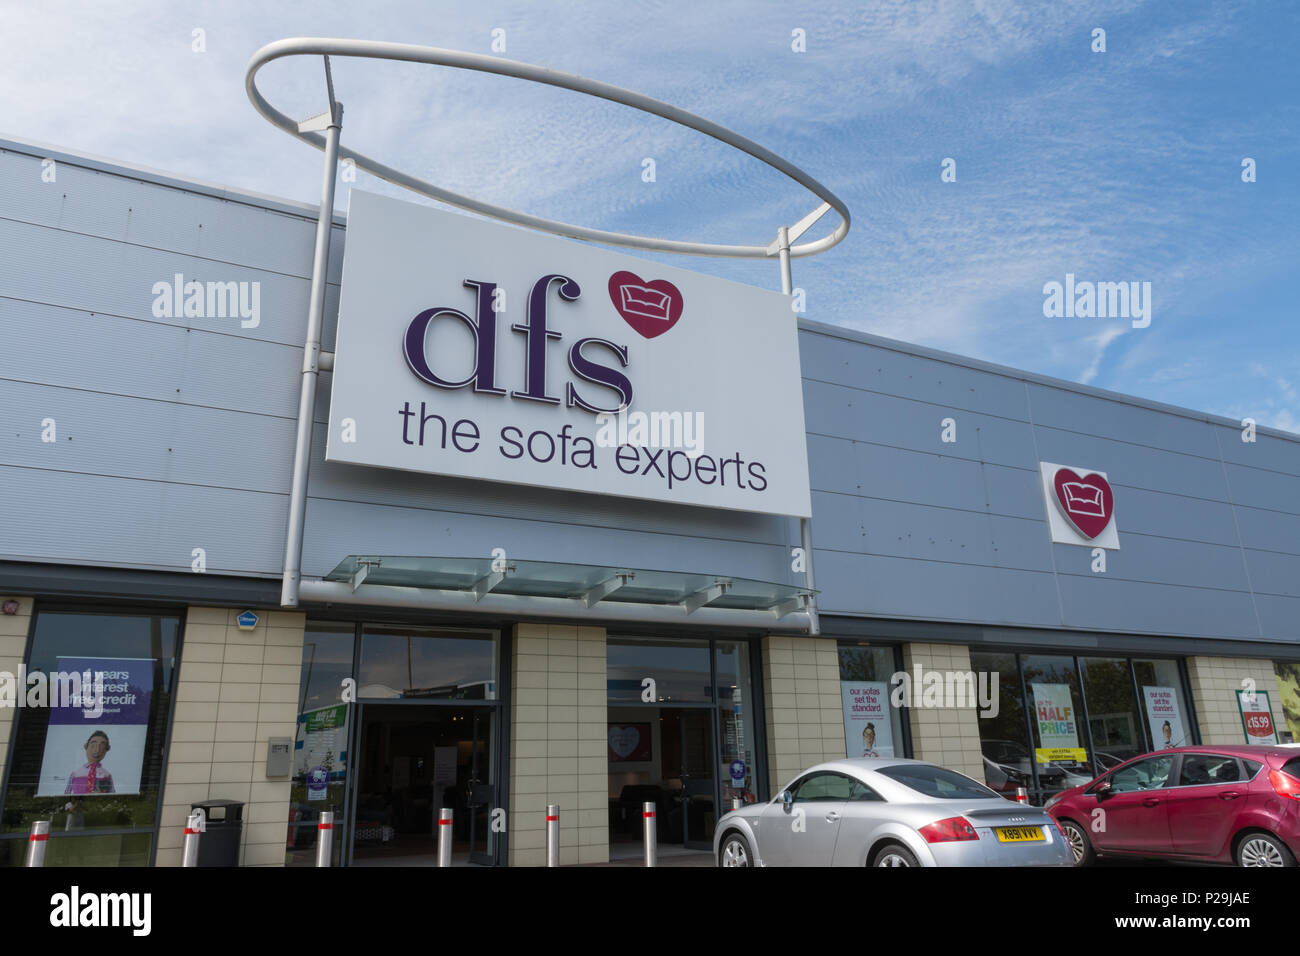 DFS, the sofa experts, exterior of shop with sign, UK Stock Photo